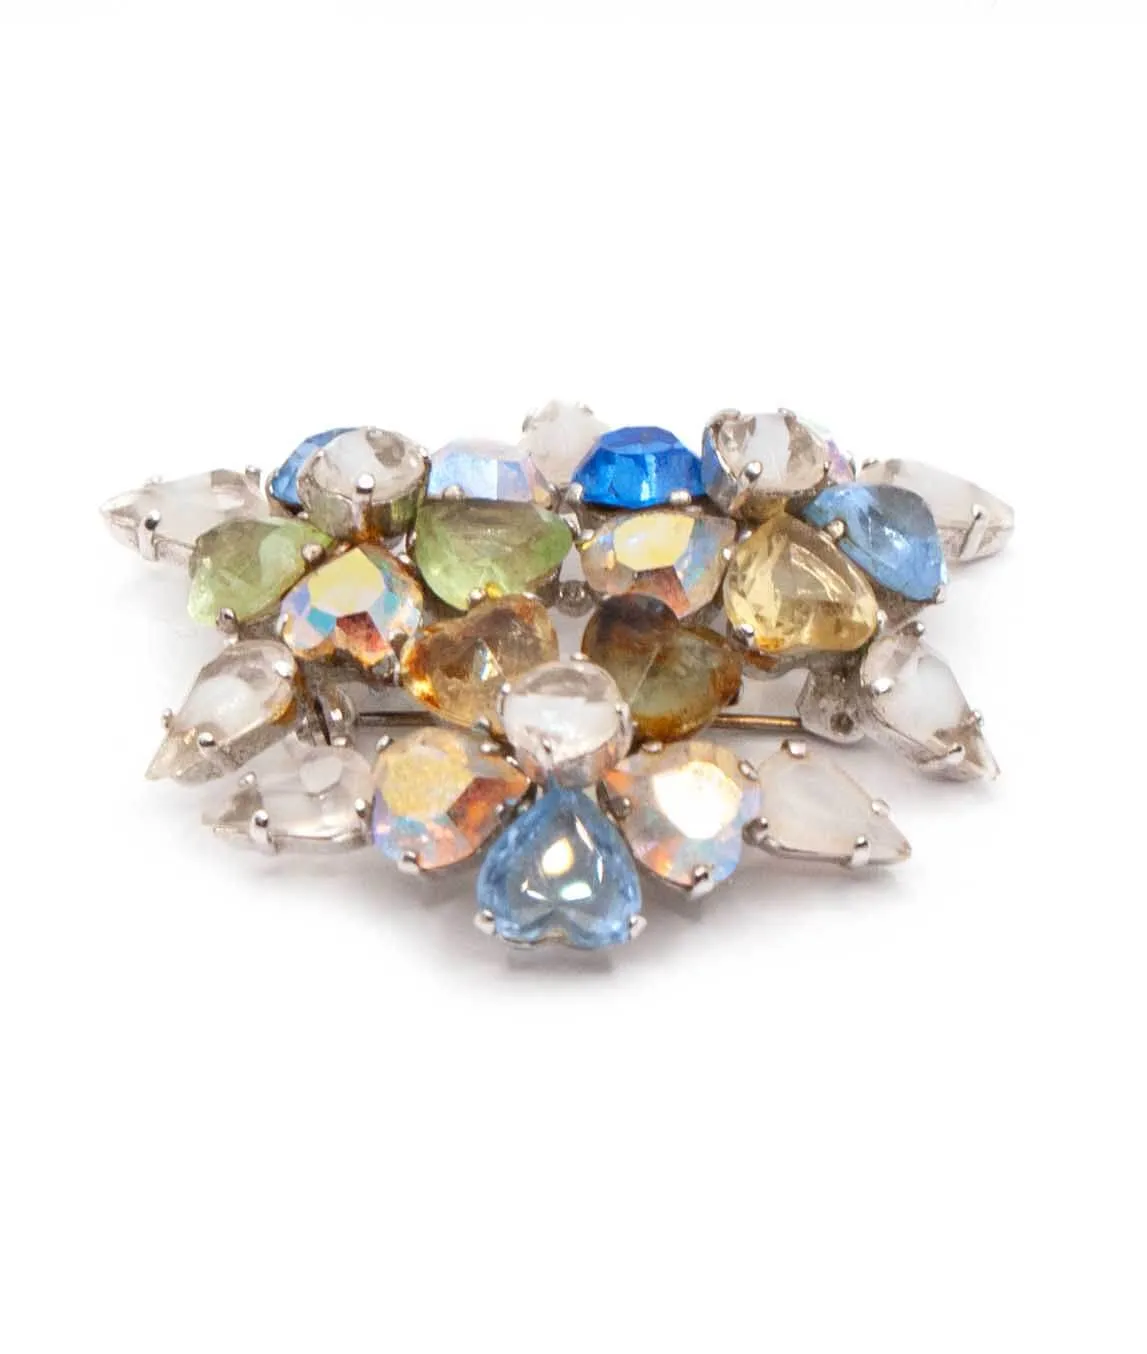 Side view of Christian Dior vintage brooch with blue and clear crystal gems